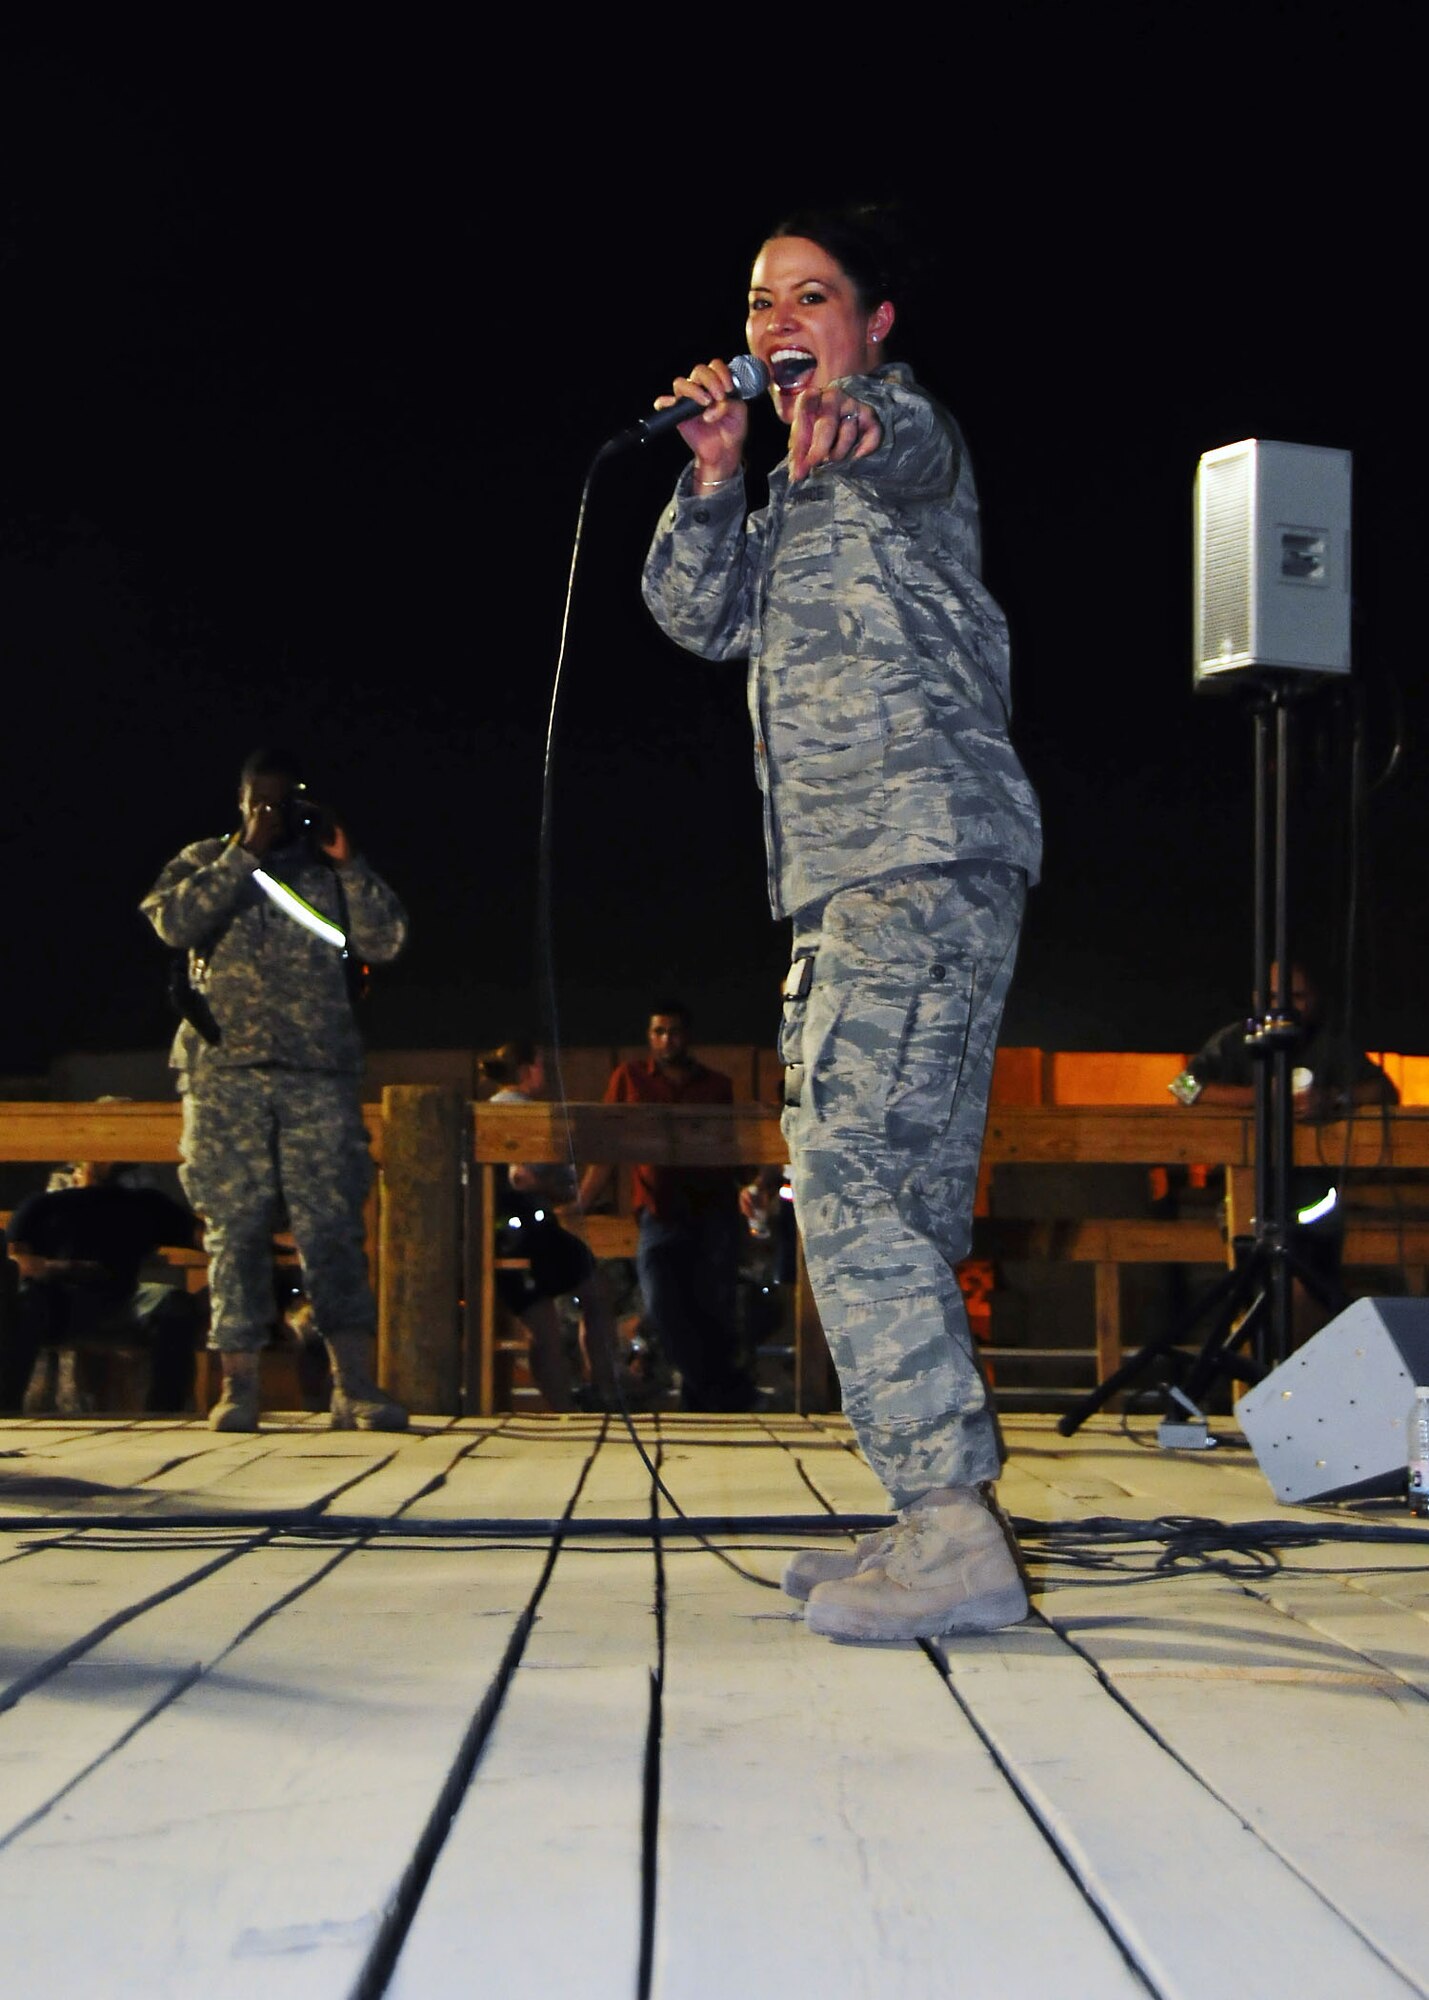 CAMP BUCCA, Iraq-- Staff Sgt. Angie Long, Air Force Central Command Sonora band, sings during a performance for members of Camp Bucca, Iraq on July 22.  Sonora offers a diverse performance repertoire featuring acoustic, electric and bass guitars, keyboards, drums, saxophone and trumpet.  Vocalists round-out the mix and an expert engineer brings it all together.  Sergeant Long is deployed from the 131st Fighter Wing, Air National Guard, Mo., and hails from Nashville, Tenn.  (U.S. Air Force photo/Tech Sgt. Tony Tolley)